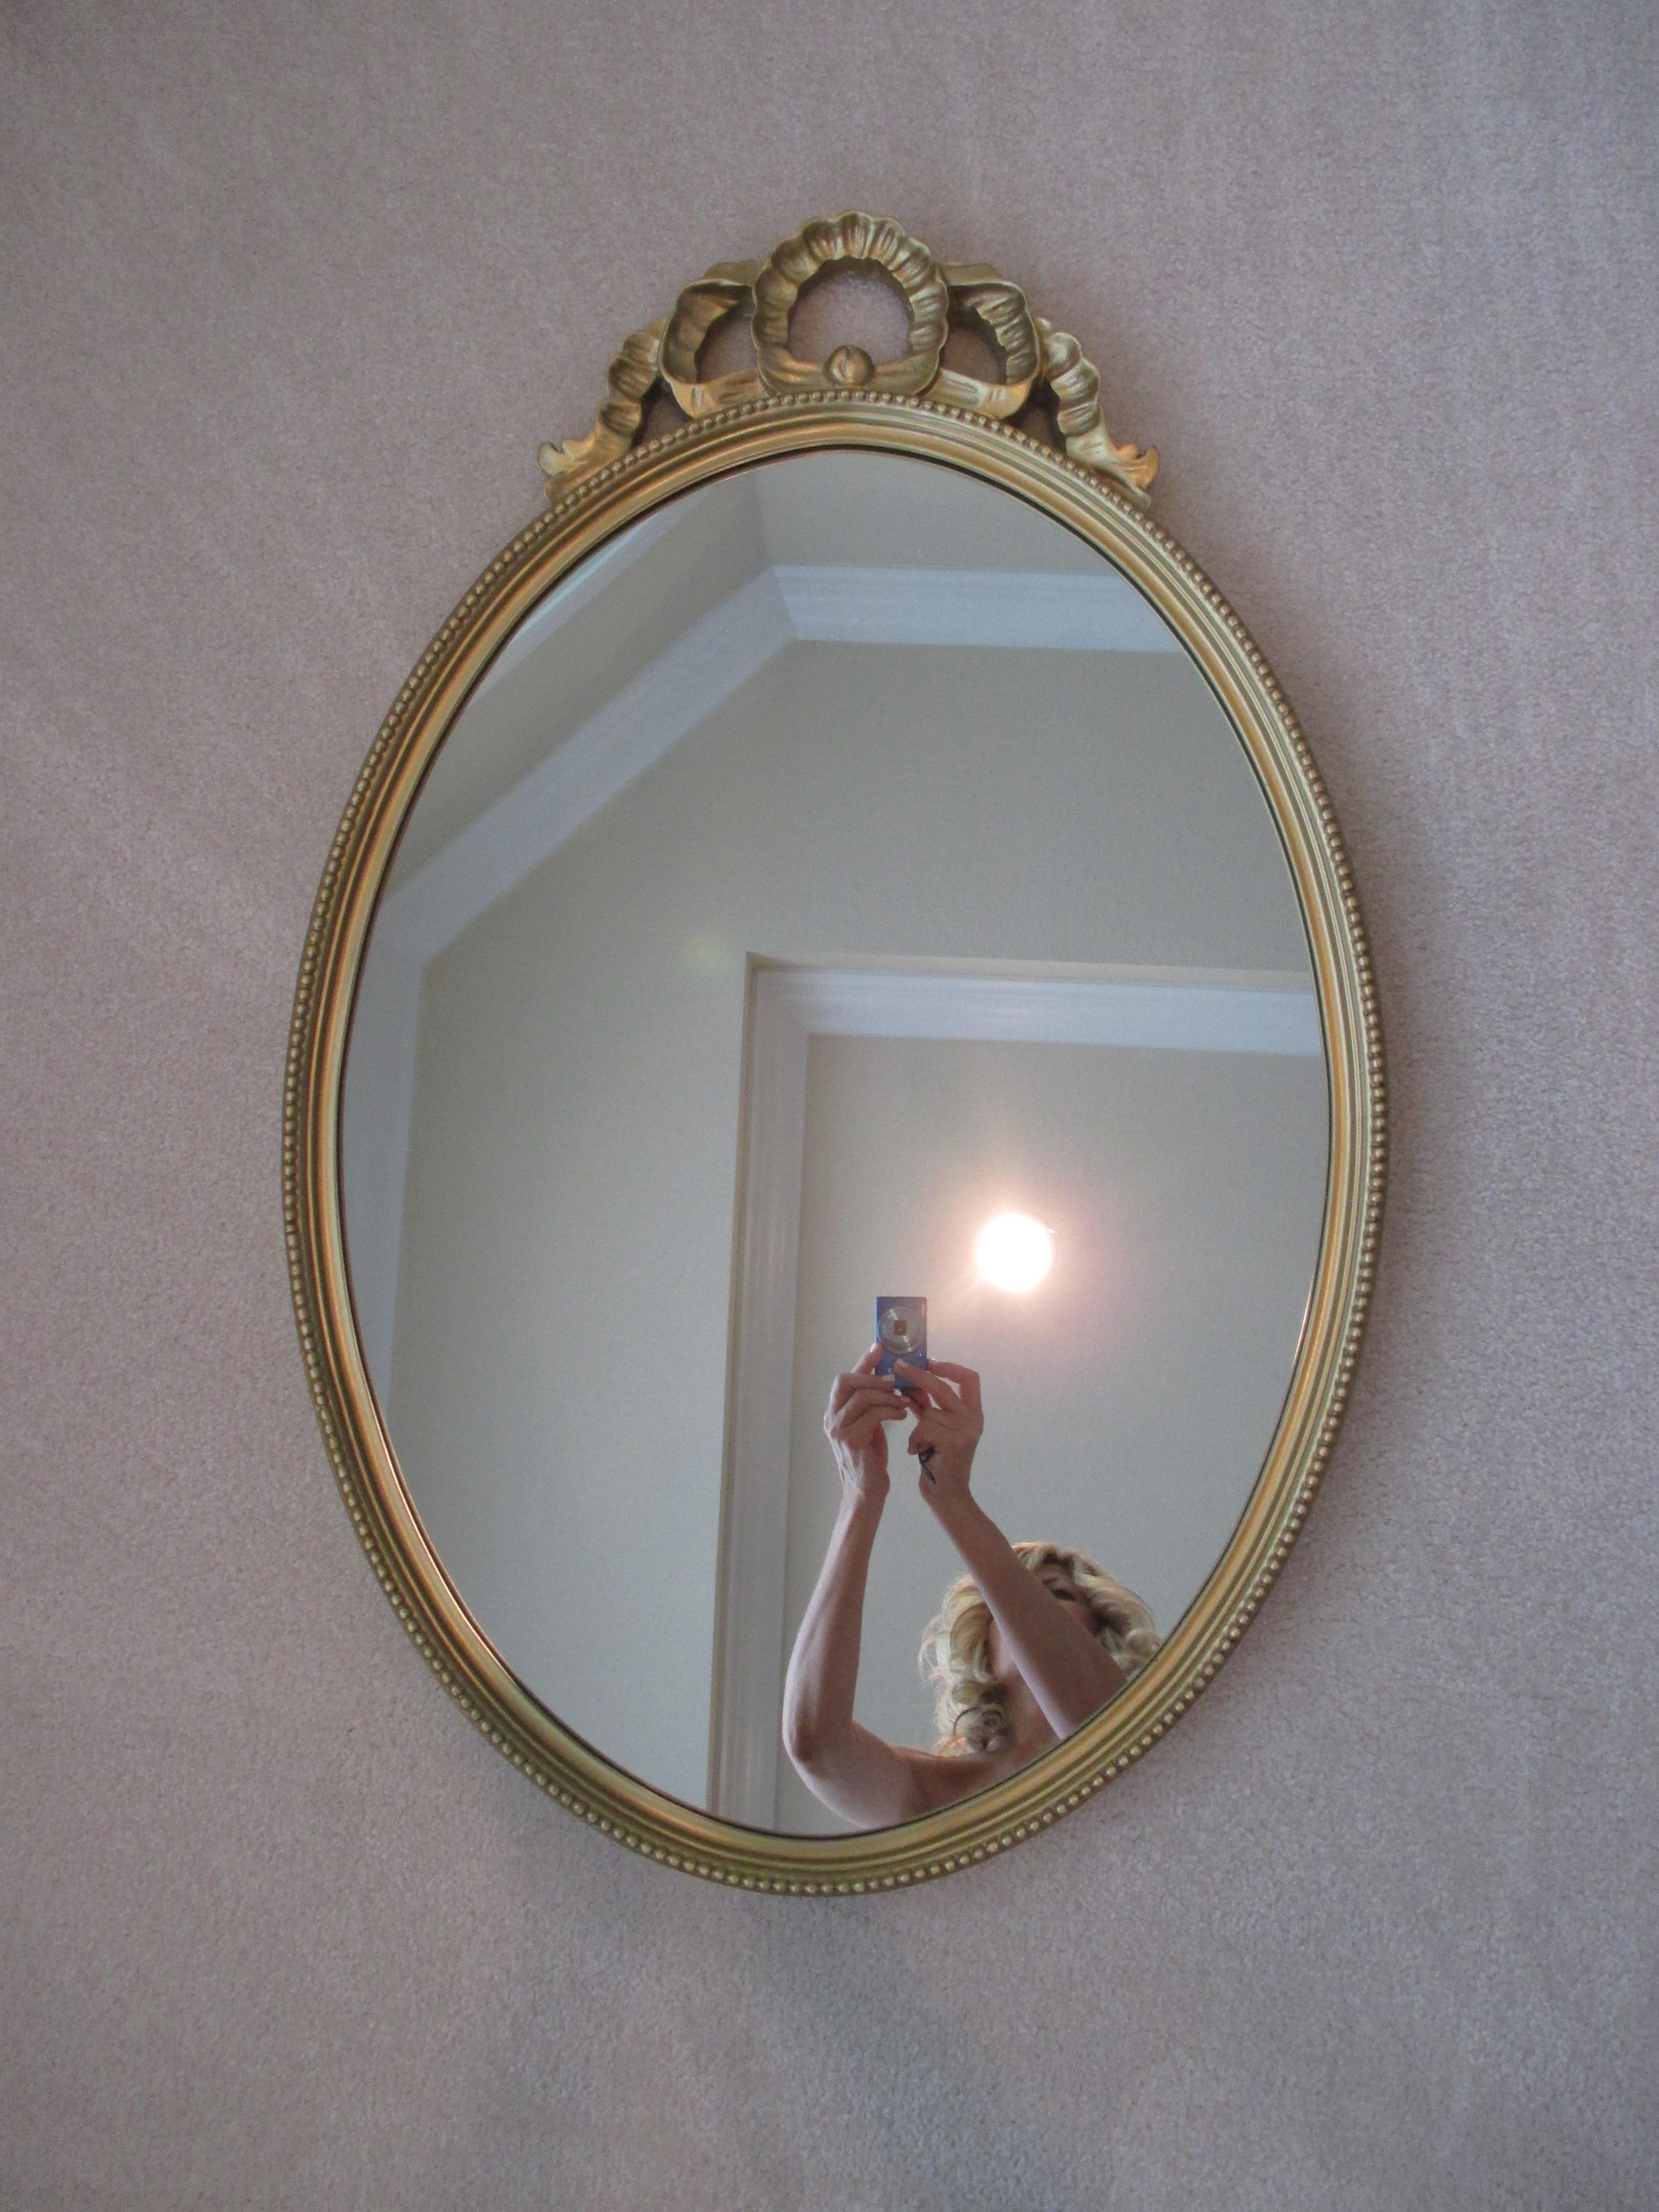 Elegant oval shaped gold mirror with ornate detail. Hanging hardware attached.